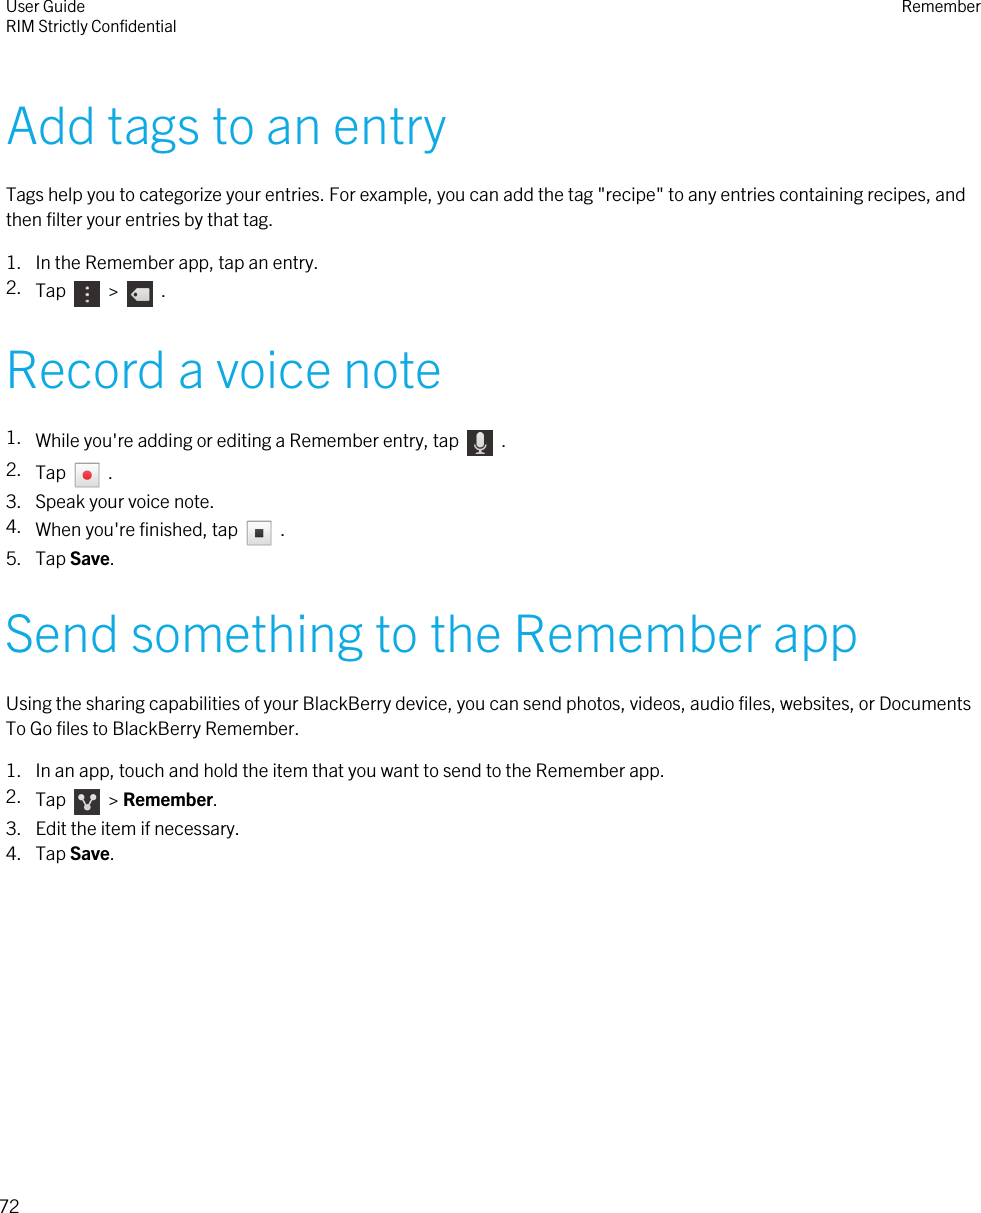 Add tags to an entryTags help you to categorize your entries. For example, you can add the tag &quot;recipe&quot; to any entries containing recipes, andthen filter your entries by that tag.1. In the Remember app, tap an entry.2. Tap    &gt;    .Record a voice note1. While you&apos;re adding or editing a Remember entry, tap    .2. Tap    .3. Speak your voice note.4. When you&apos;re finished, tap    .5. Tap Save.Send something to the Remember appUsing the sharing capabilities of your BlackBerry device, you can send photos, videos, audio files, websites, or DocumentsTo Go files to BlackBerry Remember.1. In an app, touch and hold the item that you want to send to the Remember app.2. Tap    &gt; Remember.3. Edit the item if necessary.4. Tap Save.User GuideRIM Strictly Confidential Remember72